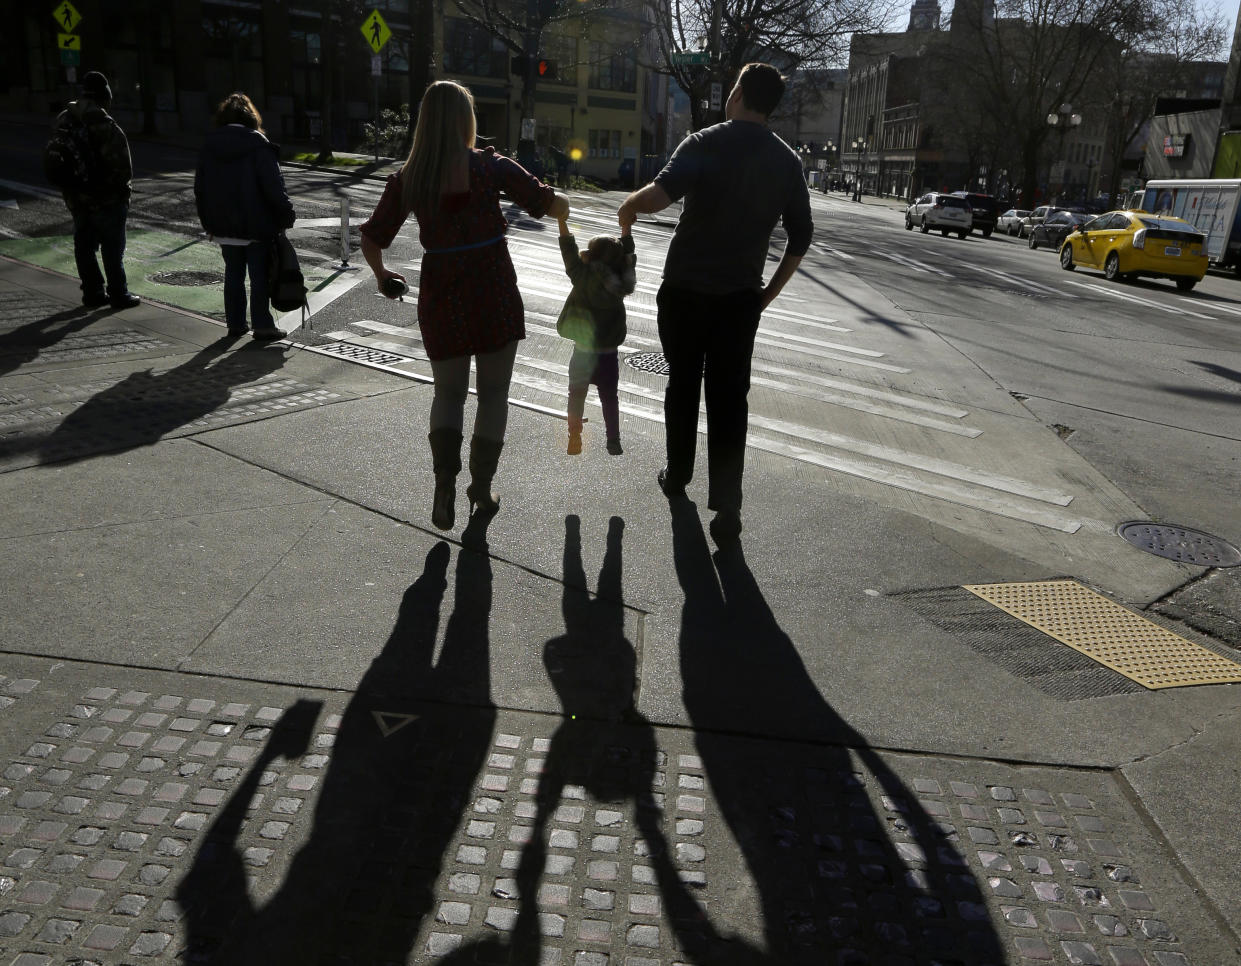 FILE - In this March 3, 2015, file photo, a child is lifted by her parents at a street corner in downtown Seattle. The expansion of a child tax credit helped seal Congress’ approval of the Republican tax overhaul. (AP Photo/Ted S. Warren, File)